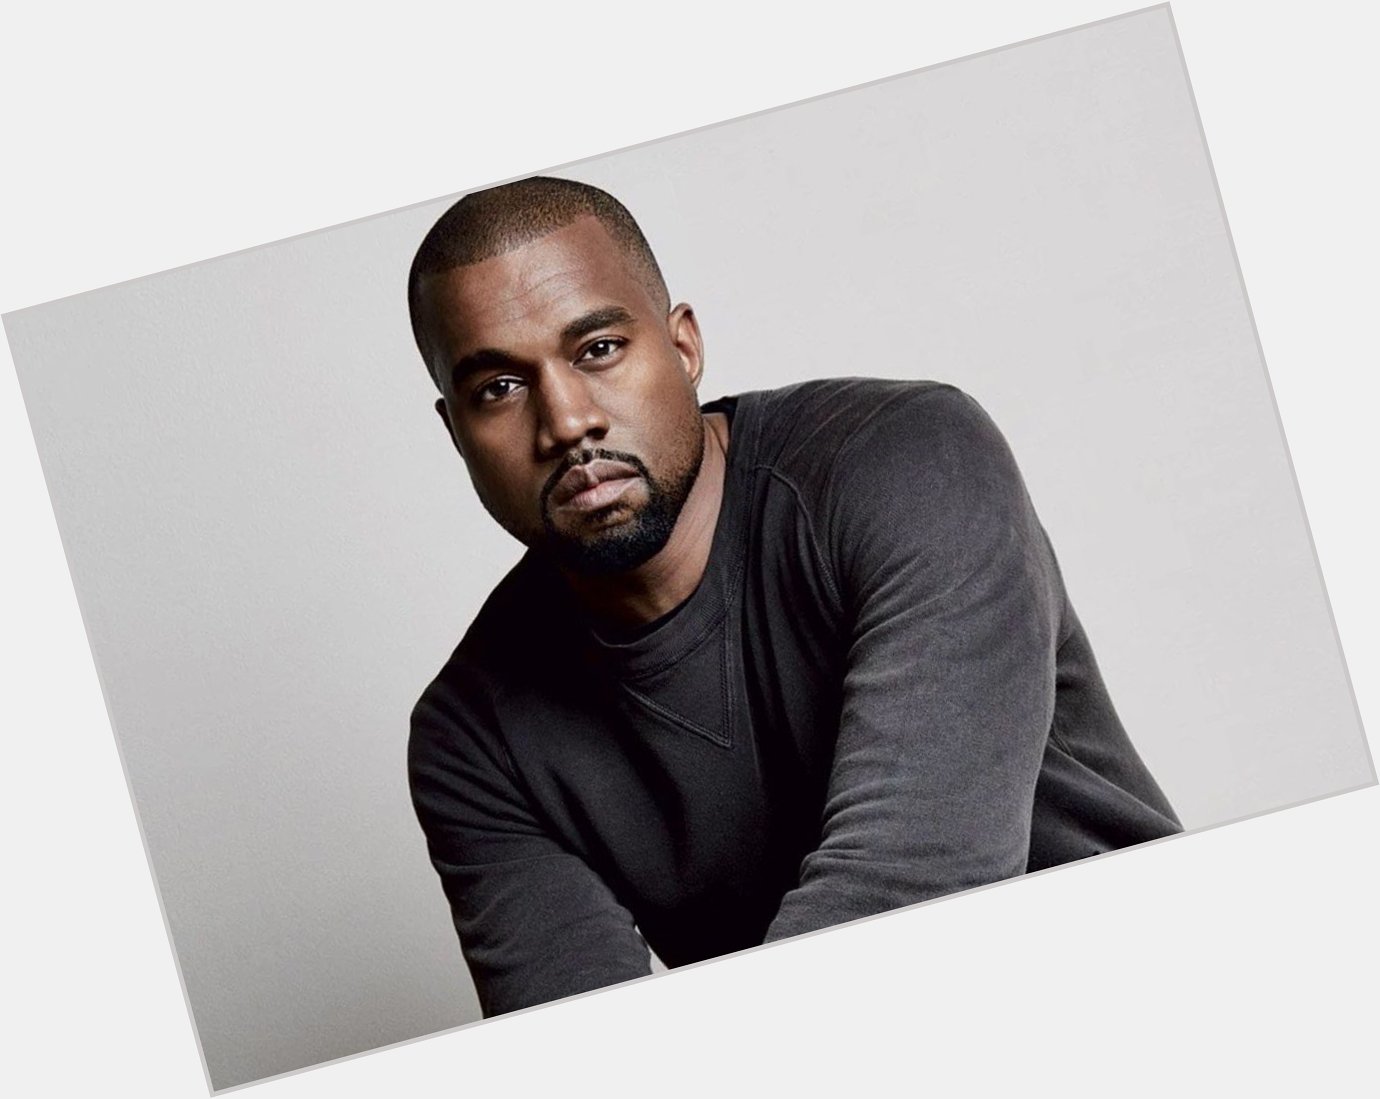 Happy 40th to Kanye West born June 8, 1977   